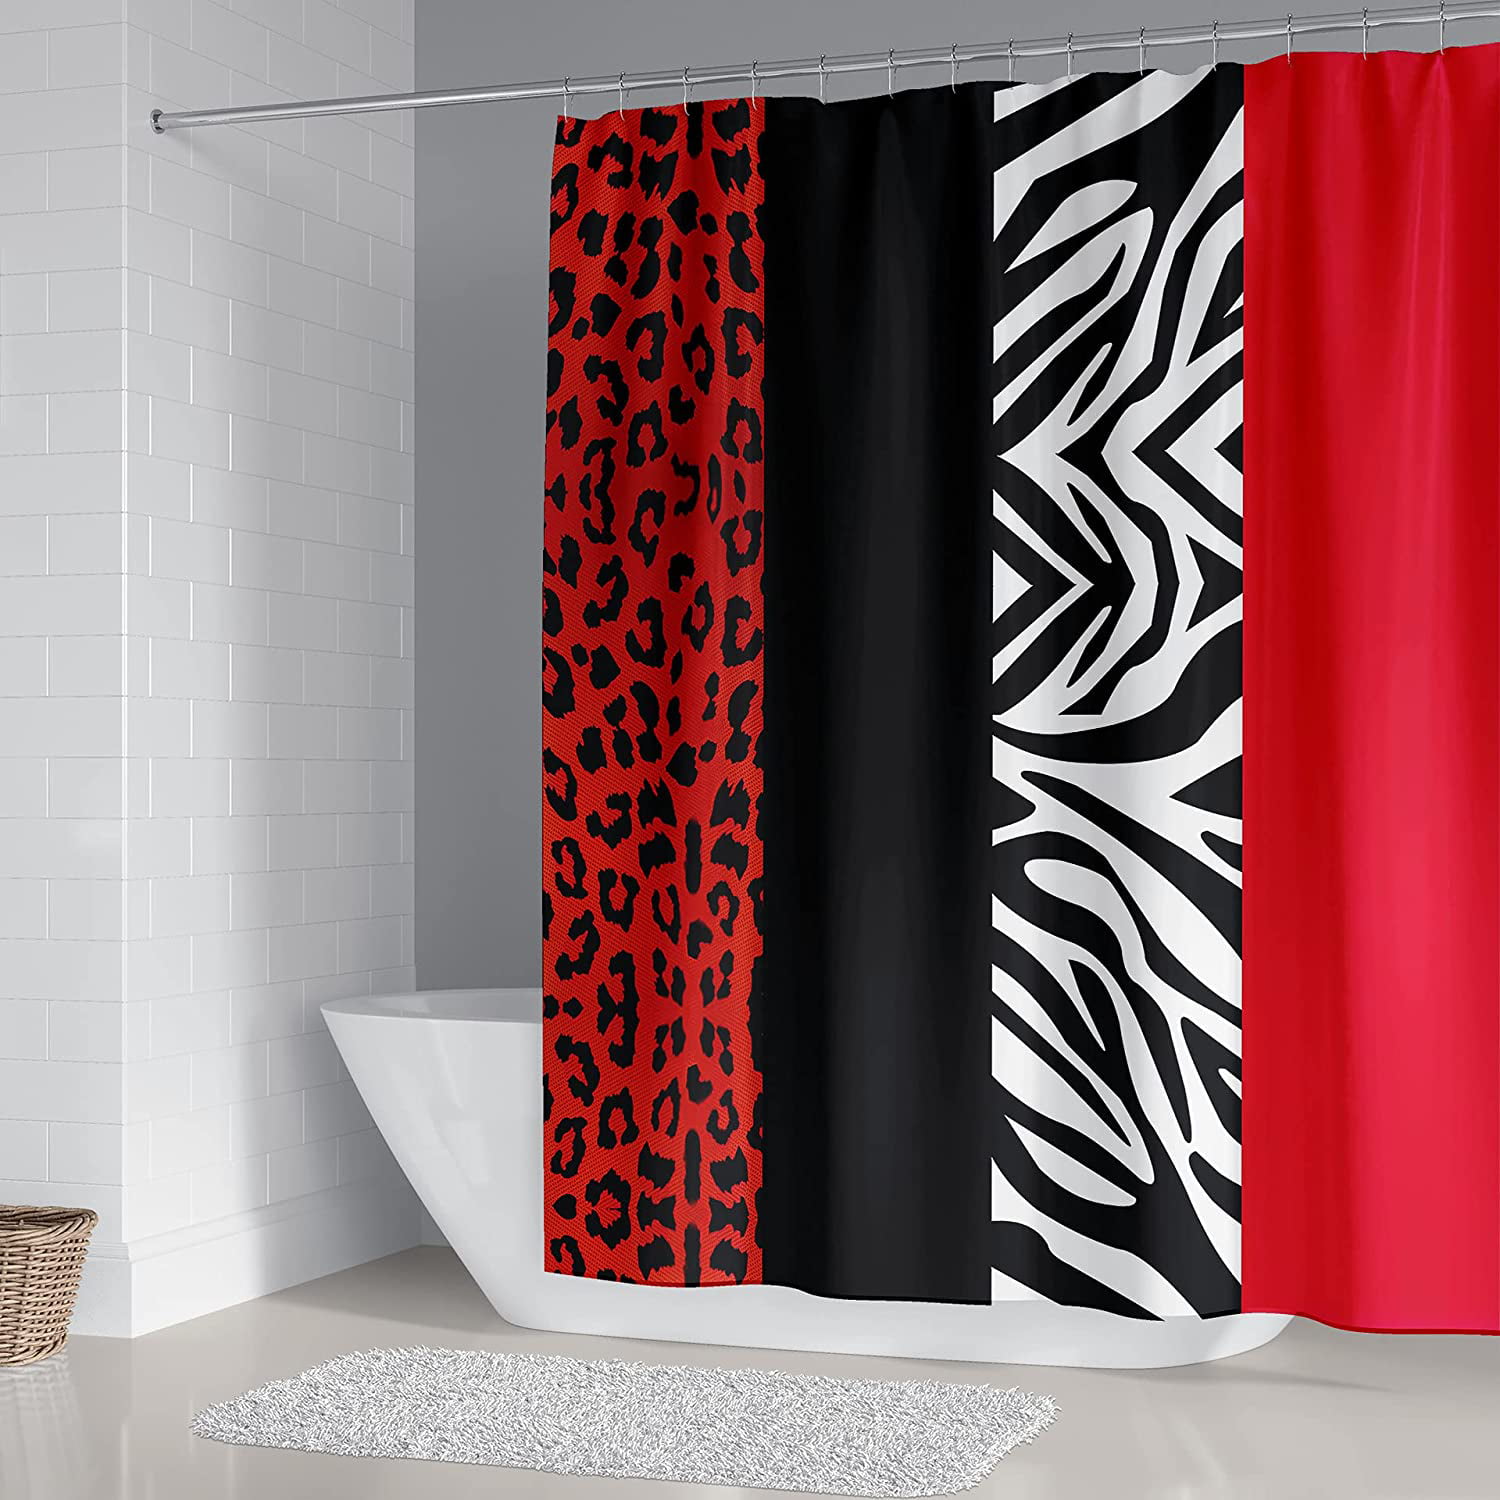 Black and White Shower Curtain Fabric Bathroom Set with Hooks 4 Sizes Available 